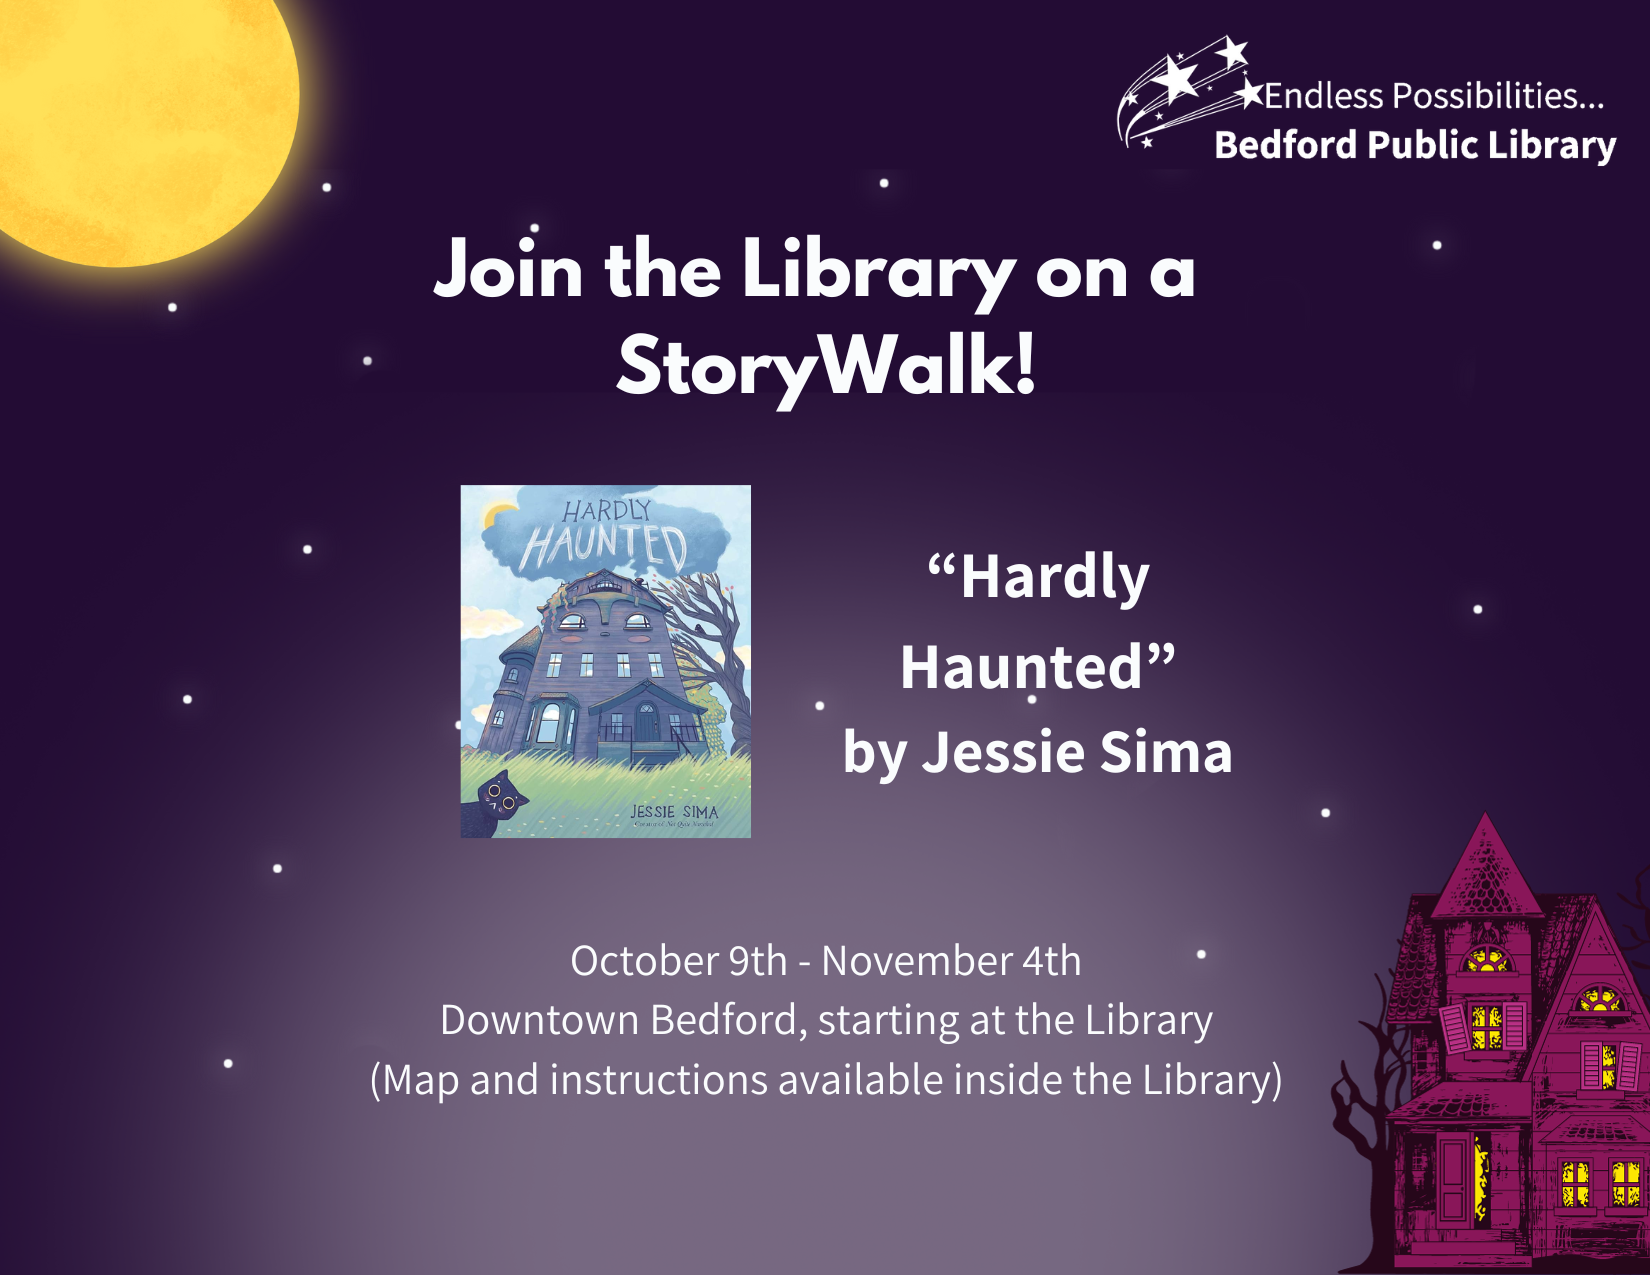 Take a walk around town and visit a few of your favorite haunts with the newest StoryWalk from the Bedford Public Library! Follow the route and follow along with "Hardly Haunted" by Jessie Sima! Route begins at the Library and maps are available inside. Once you've completed the Walk, stop by the Children's Department for a prize!